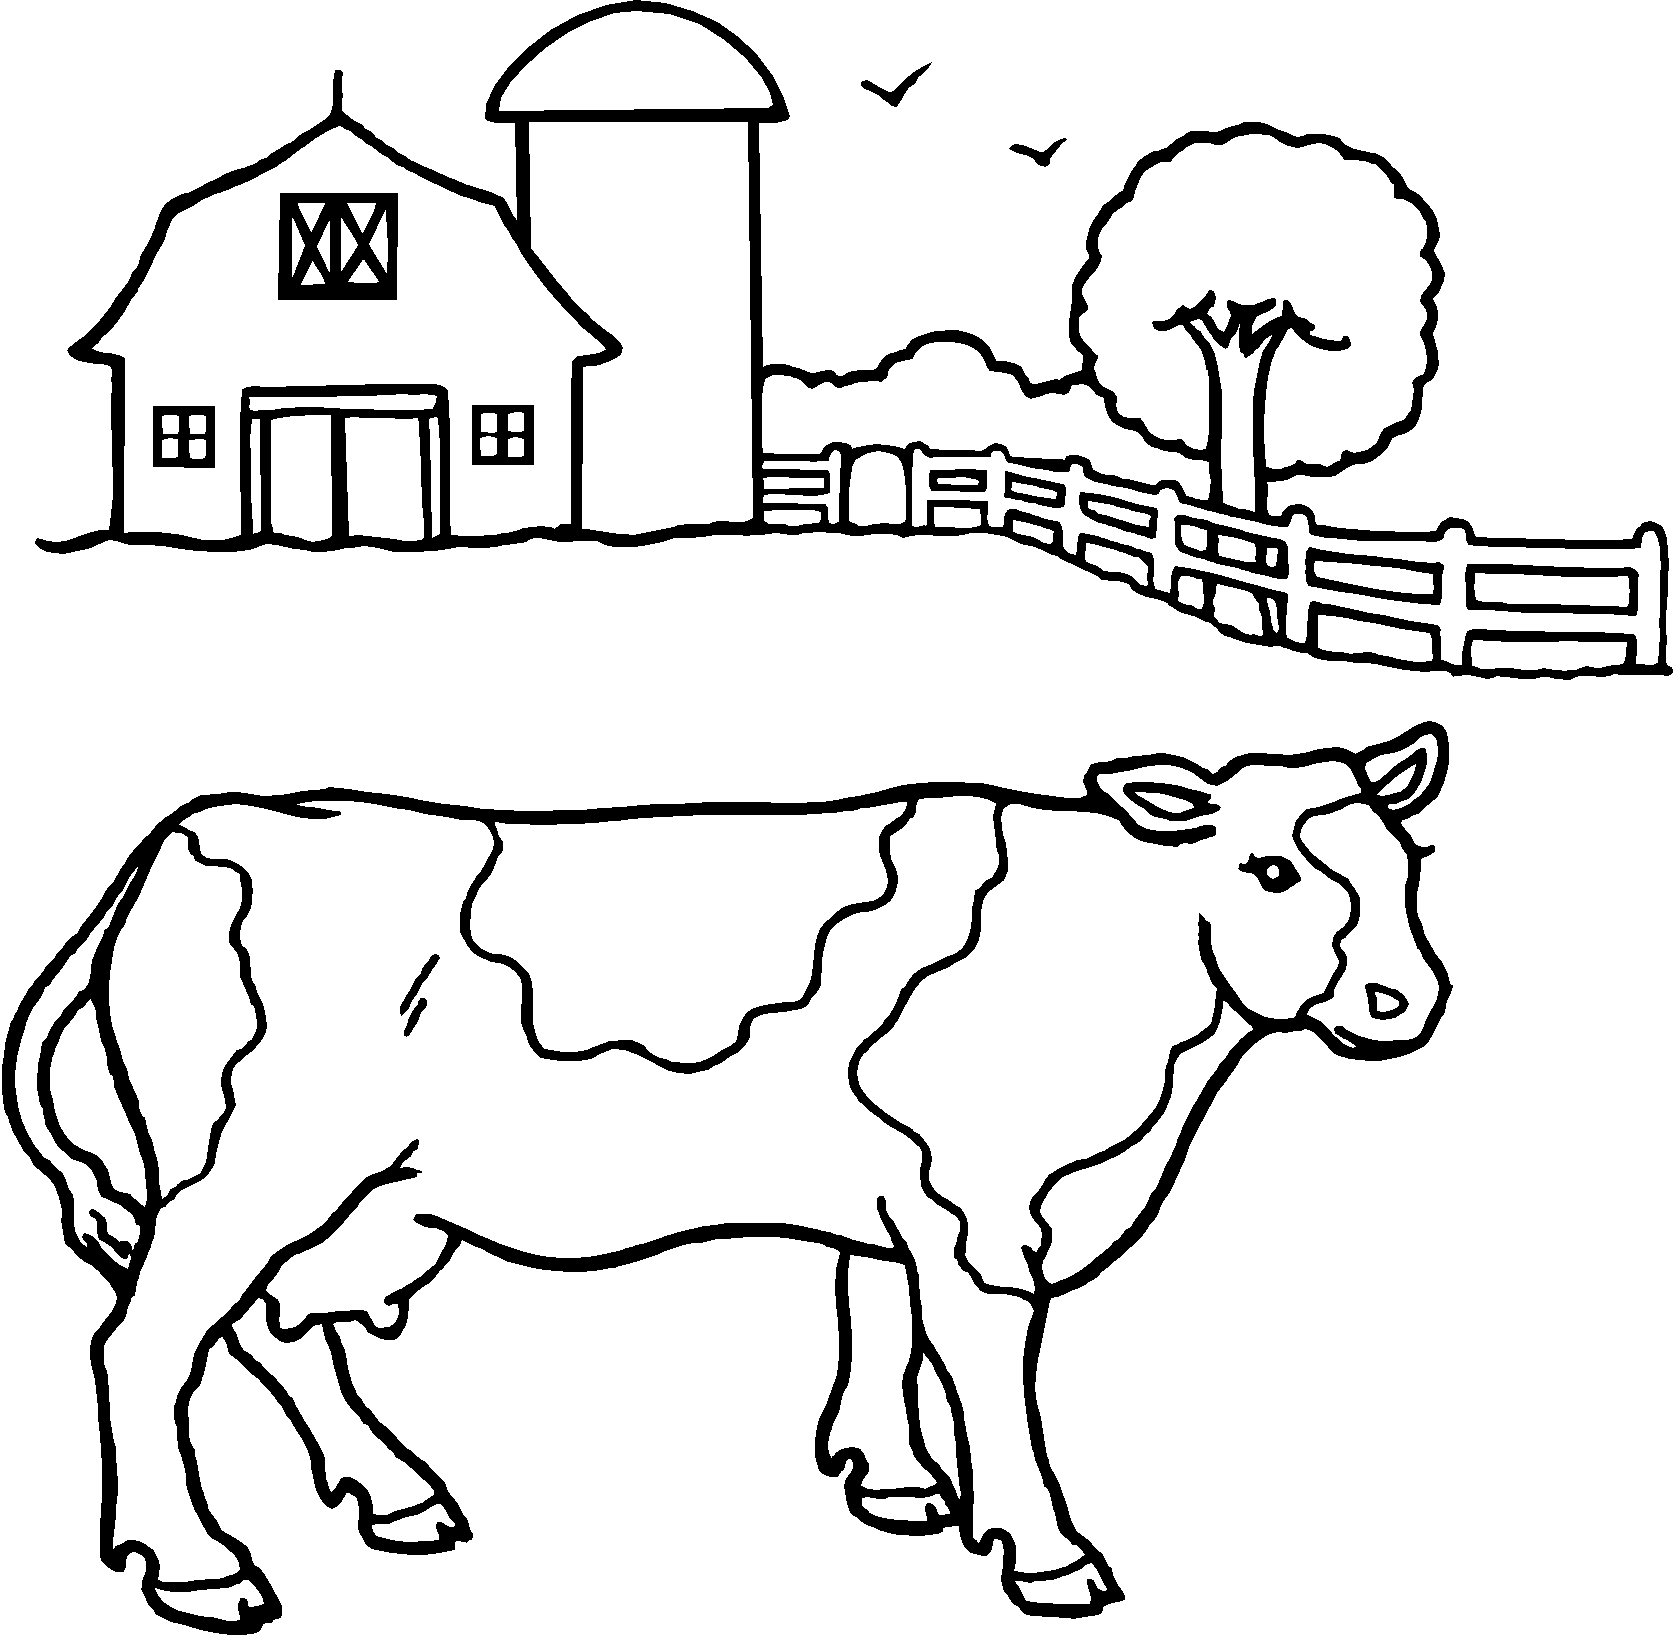 Free Printable Cow Coloring Sheets | Coloring